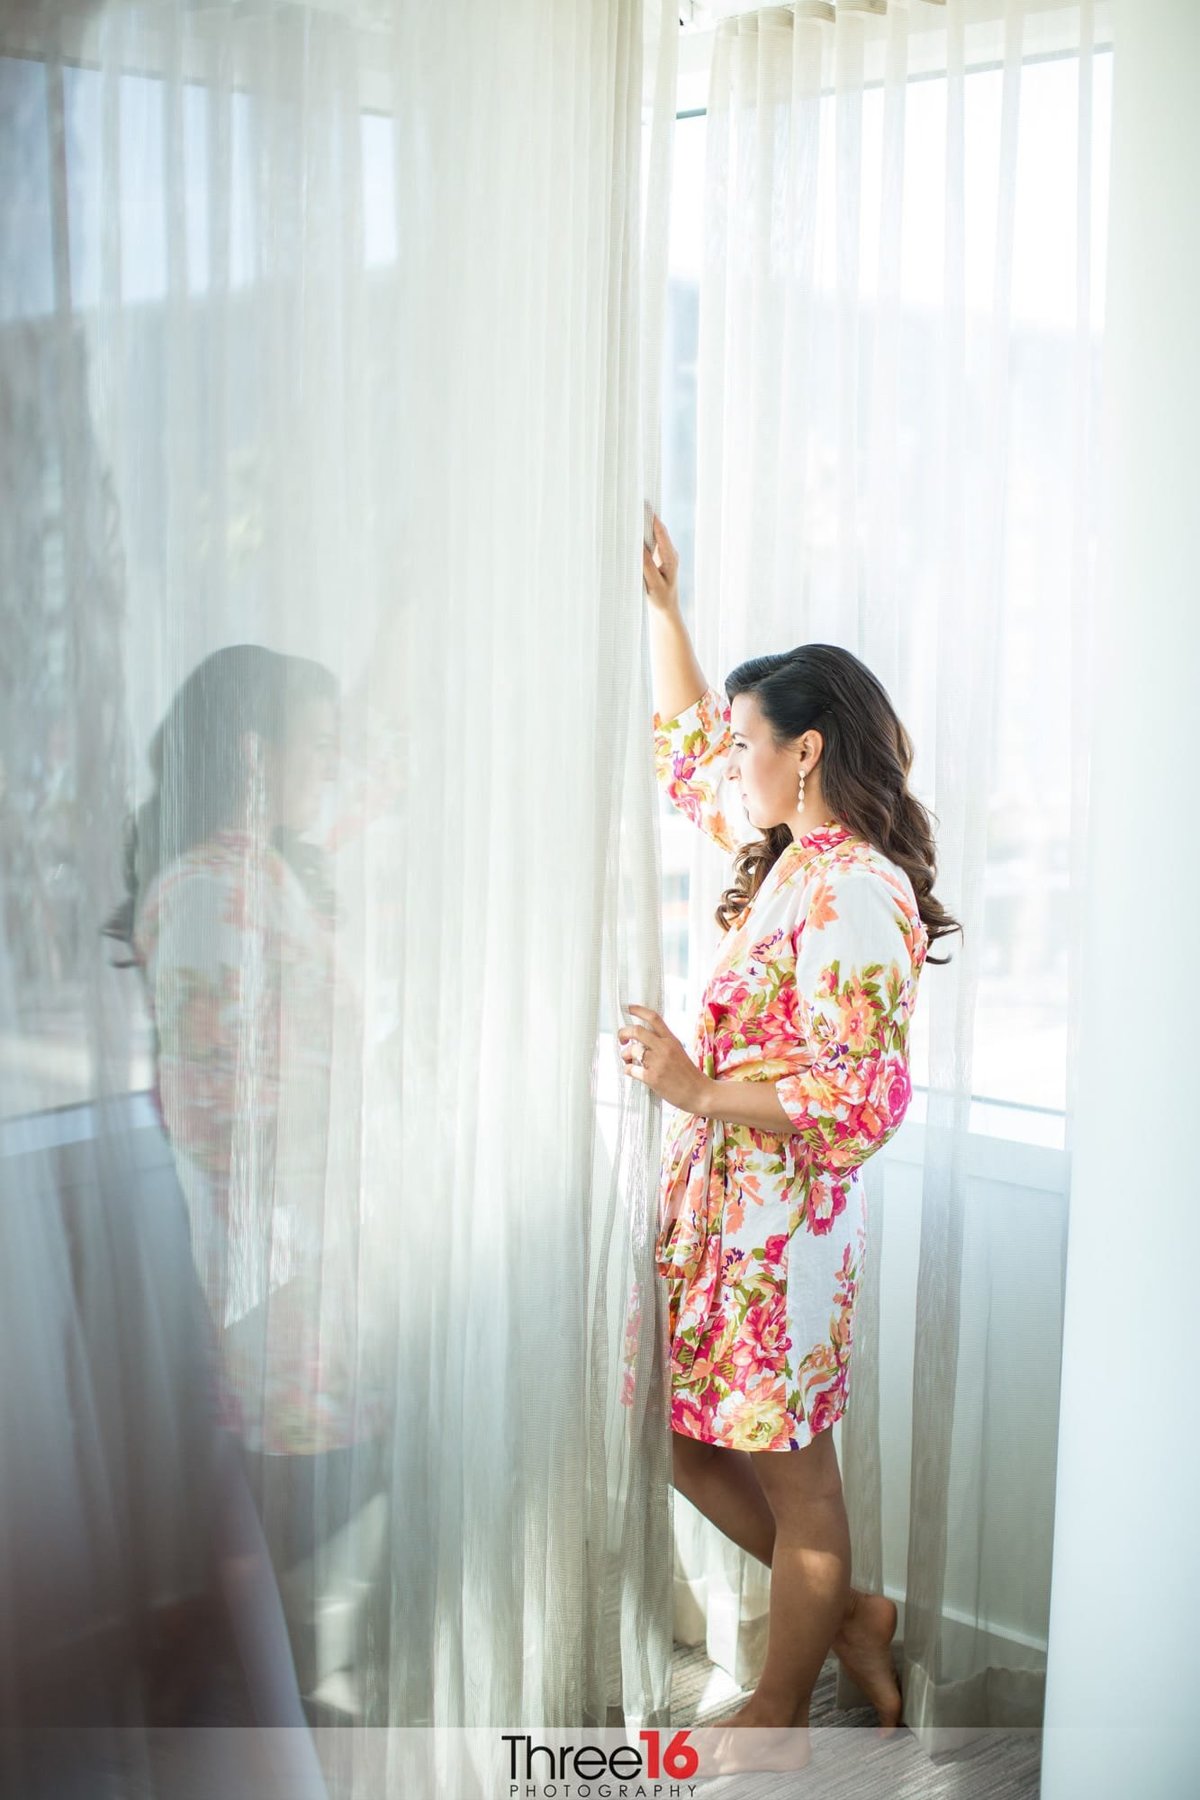 Bride looks out the window while still wearing her robe prior to the ceremony